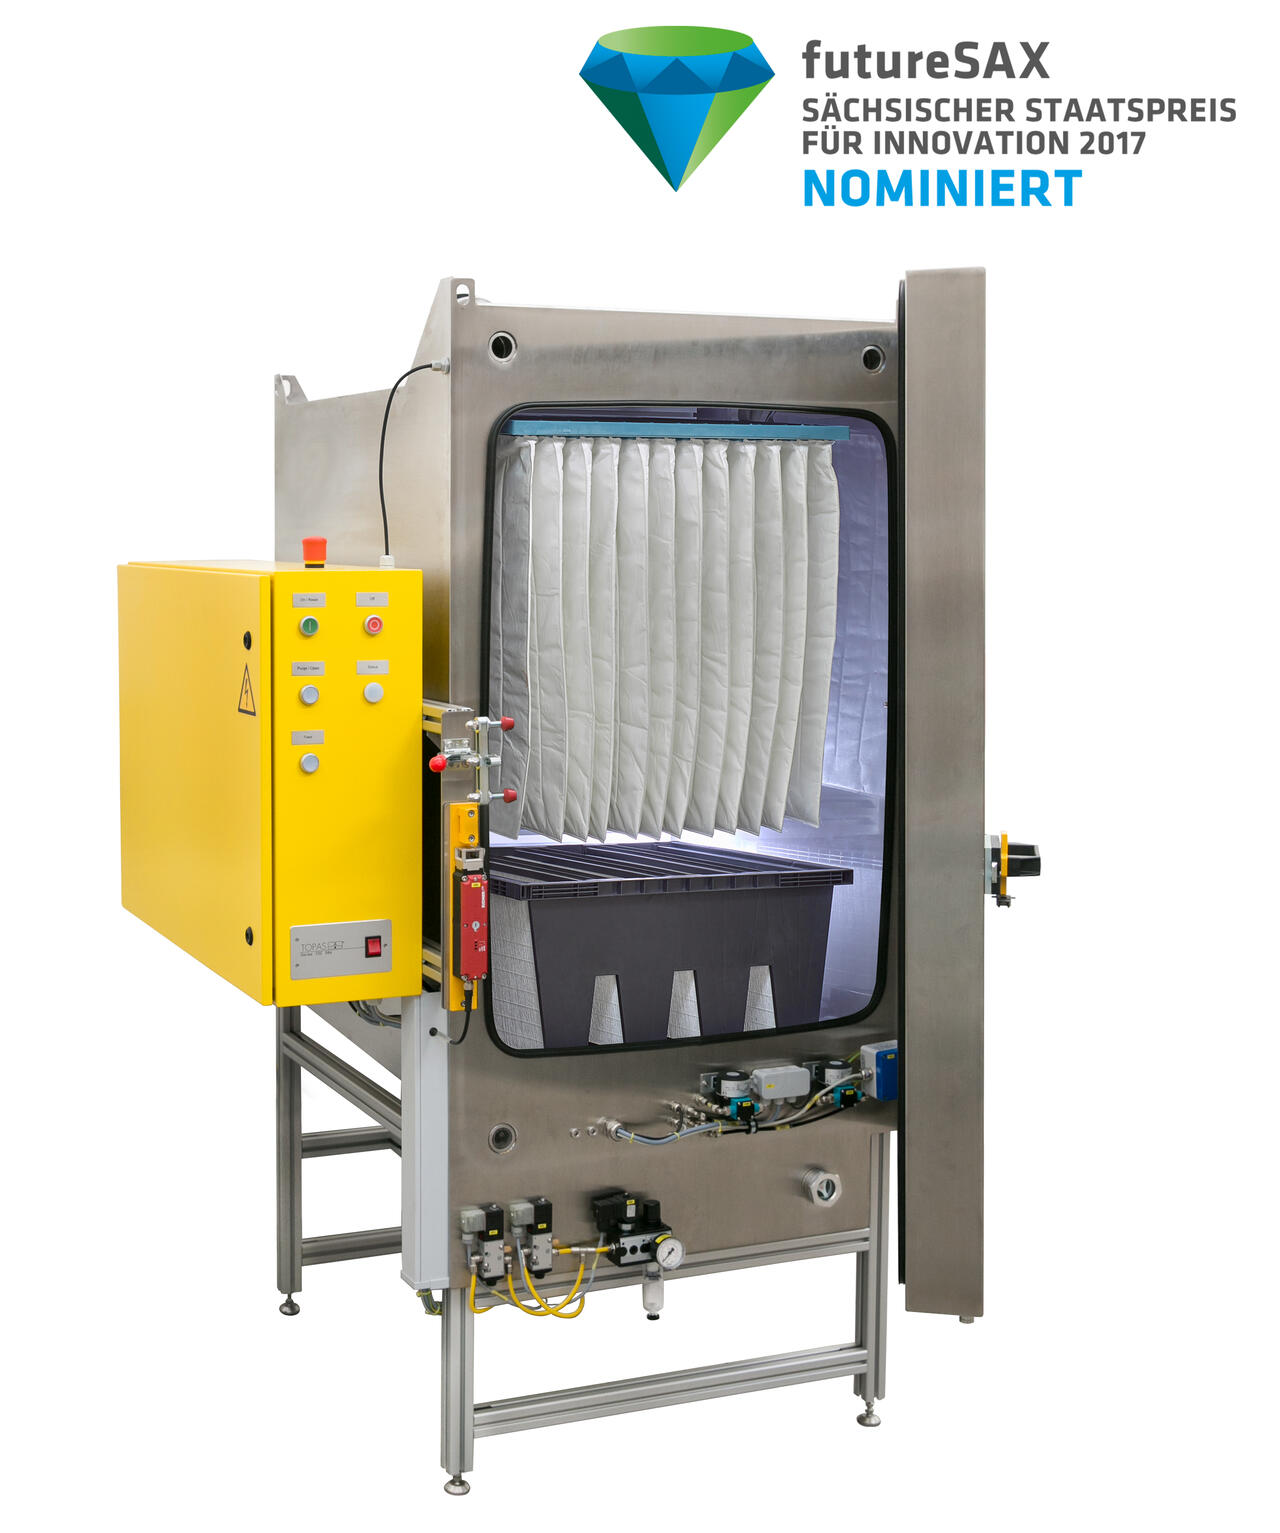 Conditioning cabinet for testing clean air filters according to ISO 16890-4 with logo of futuresax Nominated